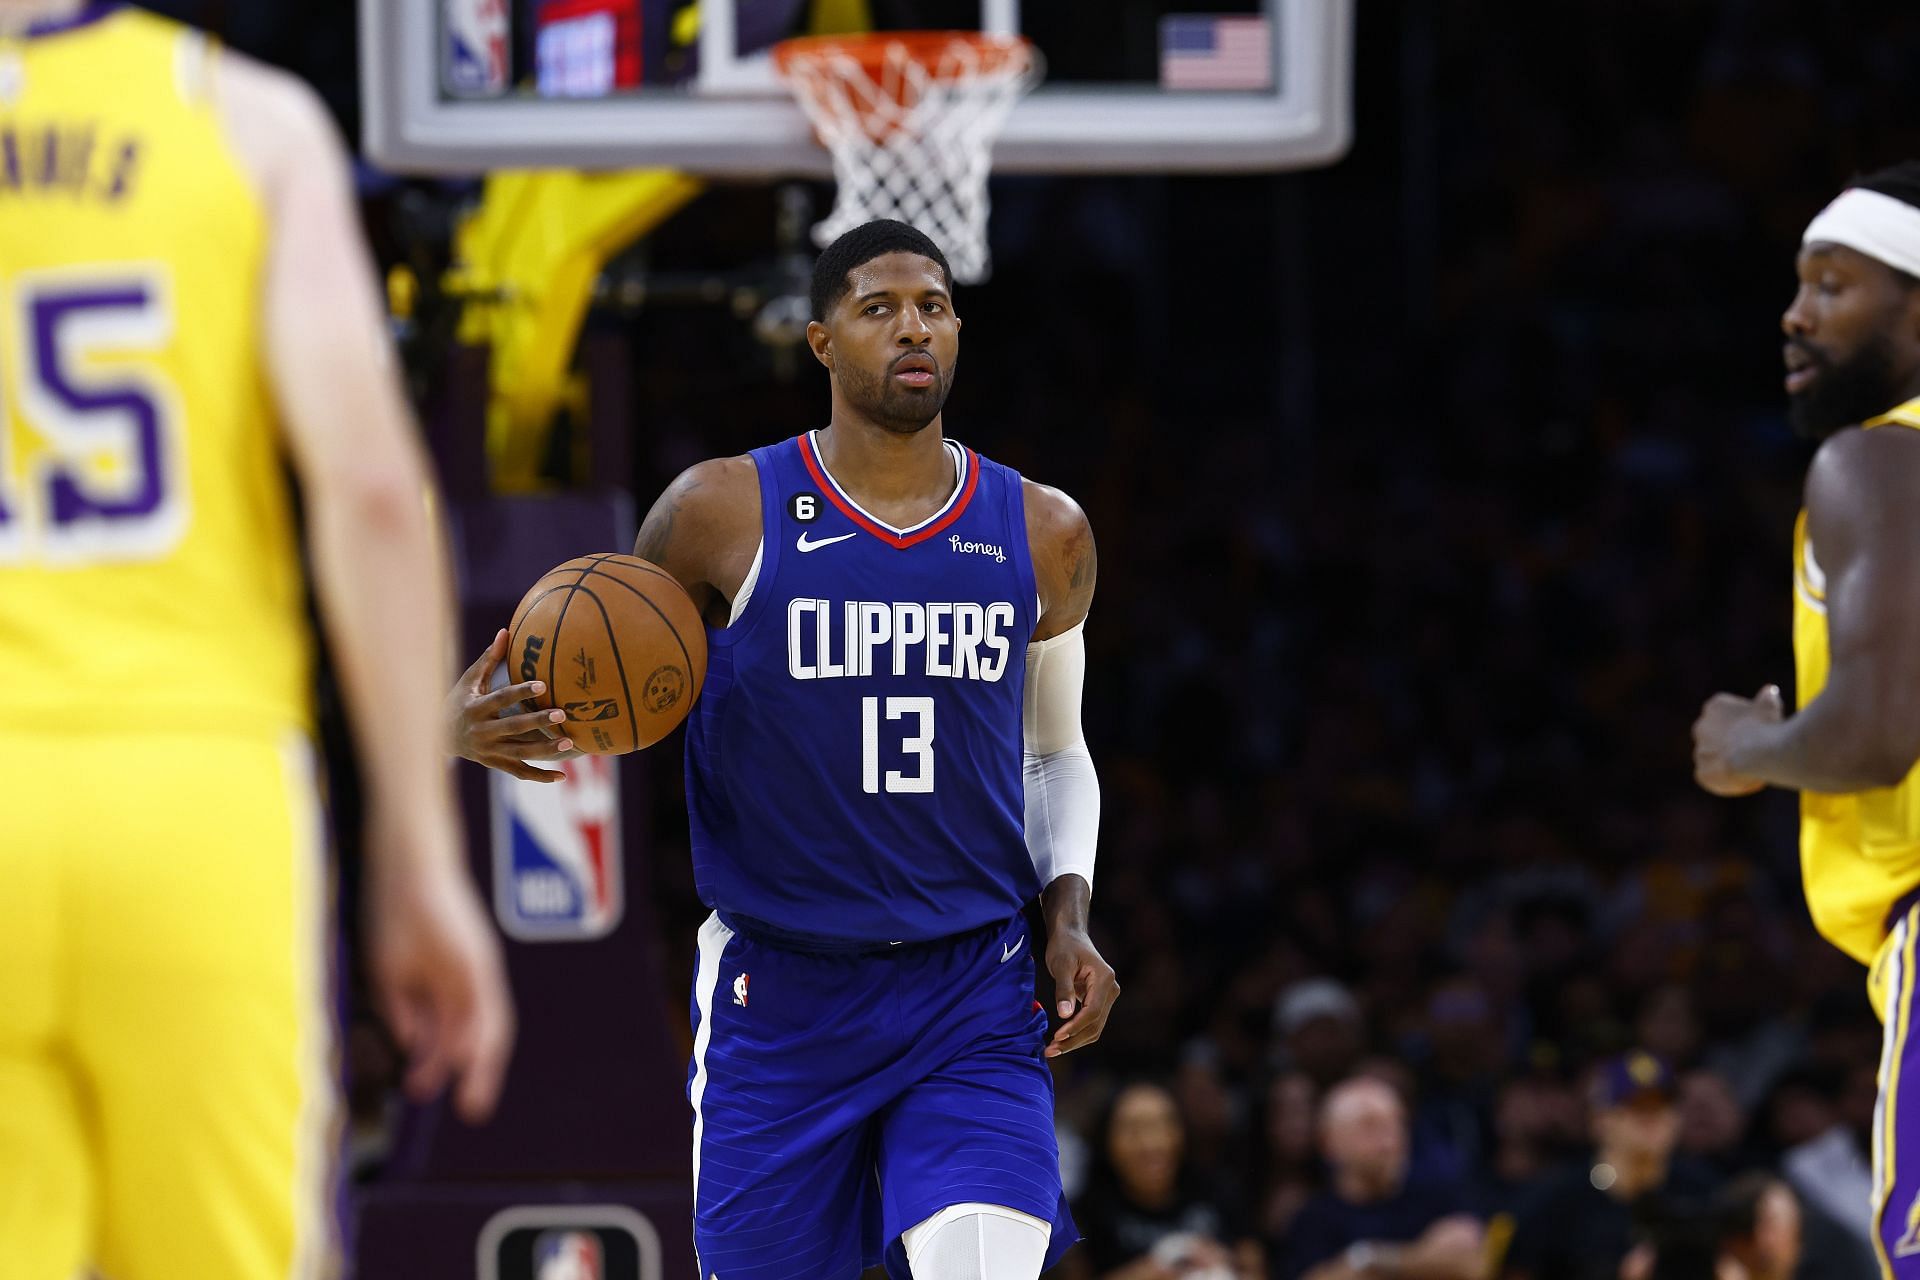 The Lakers will face the Clippers without Paul George. (Image via Getty Images)